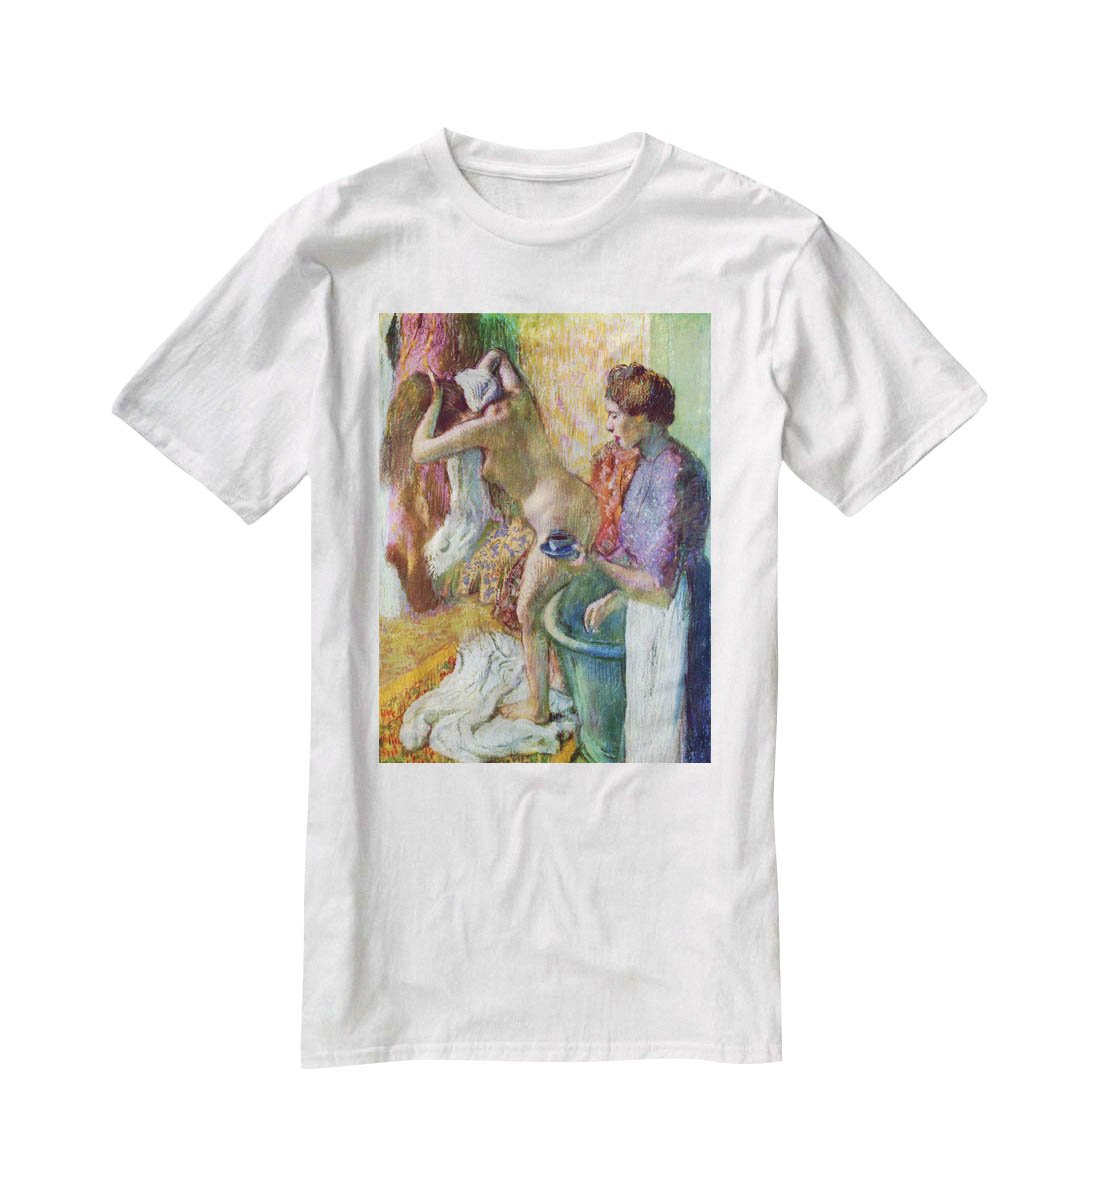 After bathing 1 by Degas T-Shirt - Canvas Art Rocks - 5